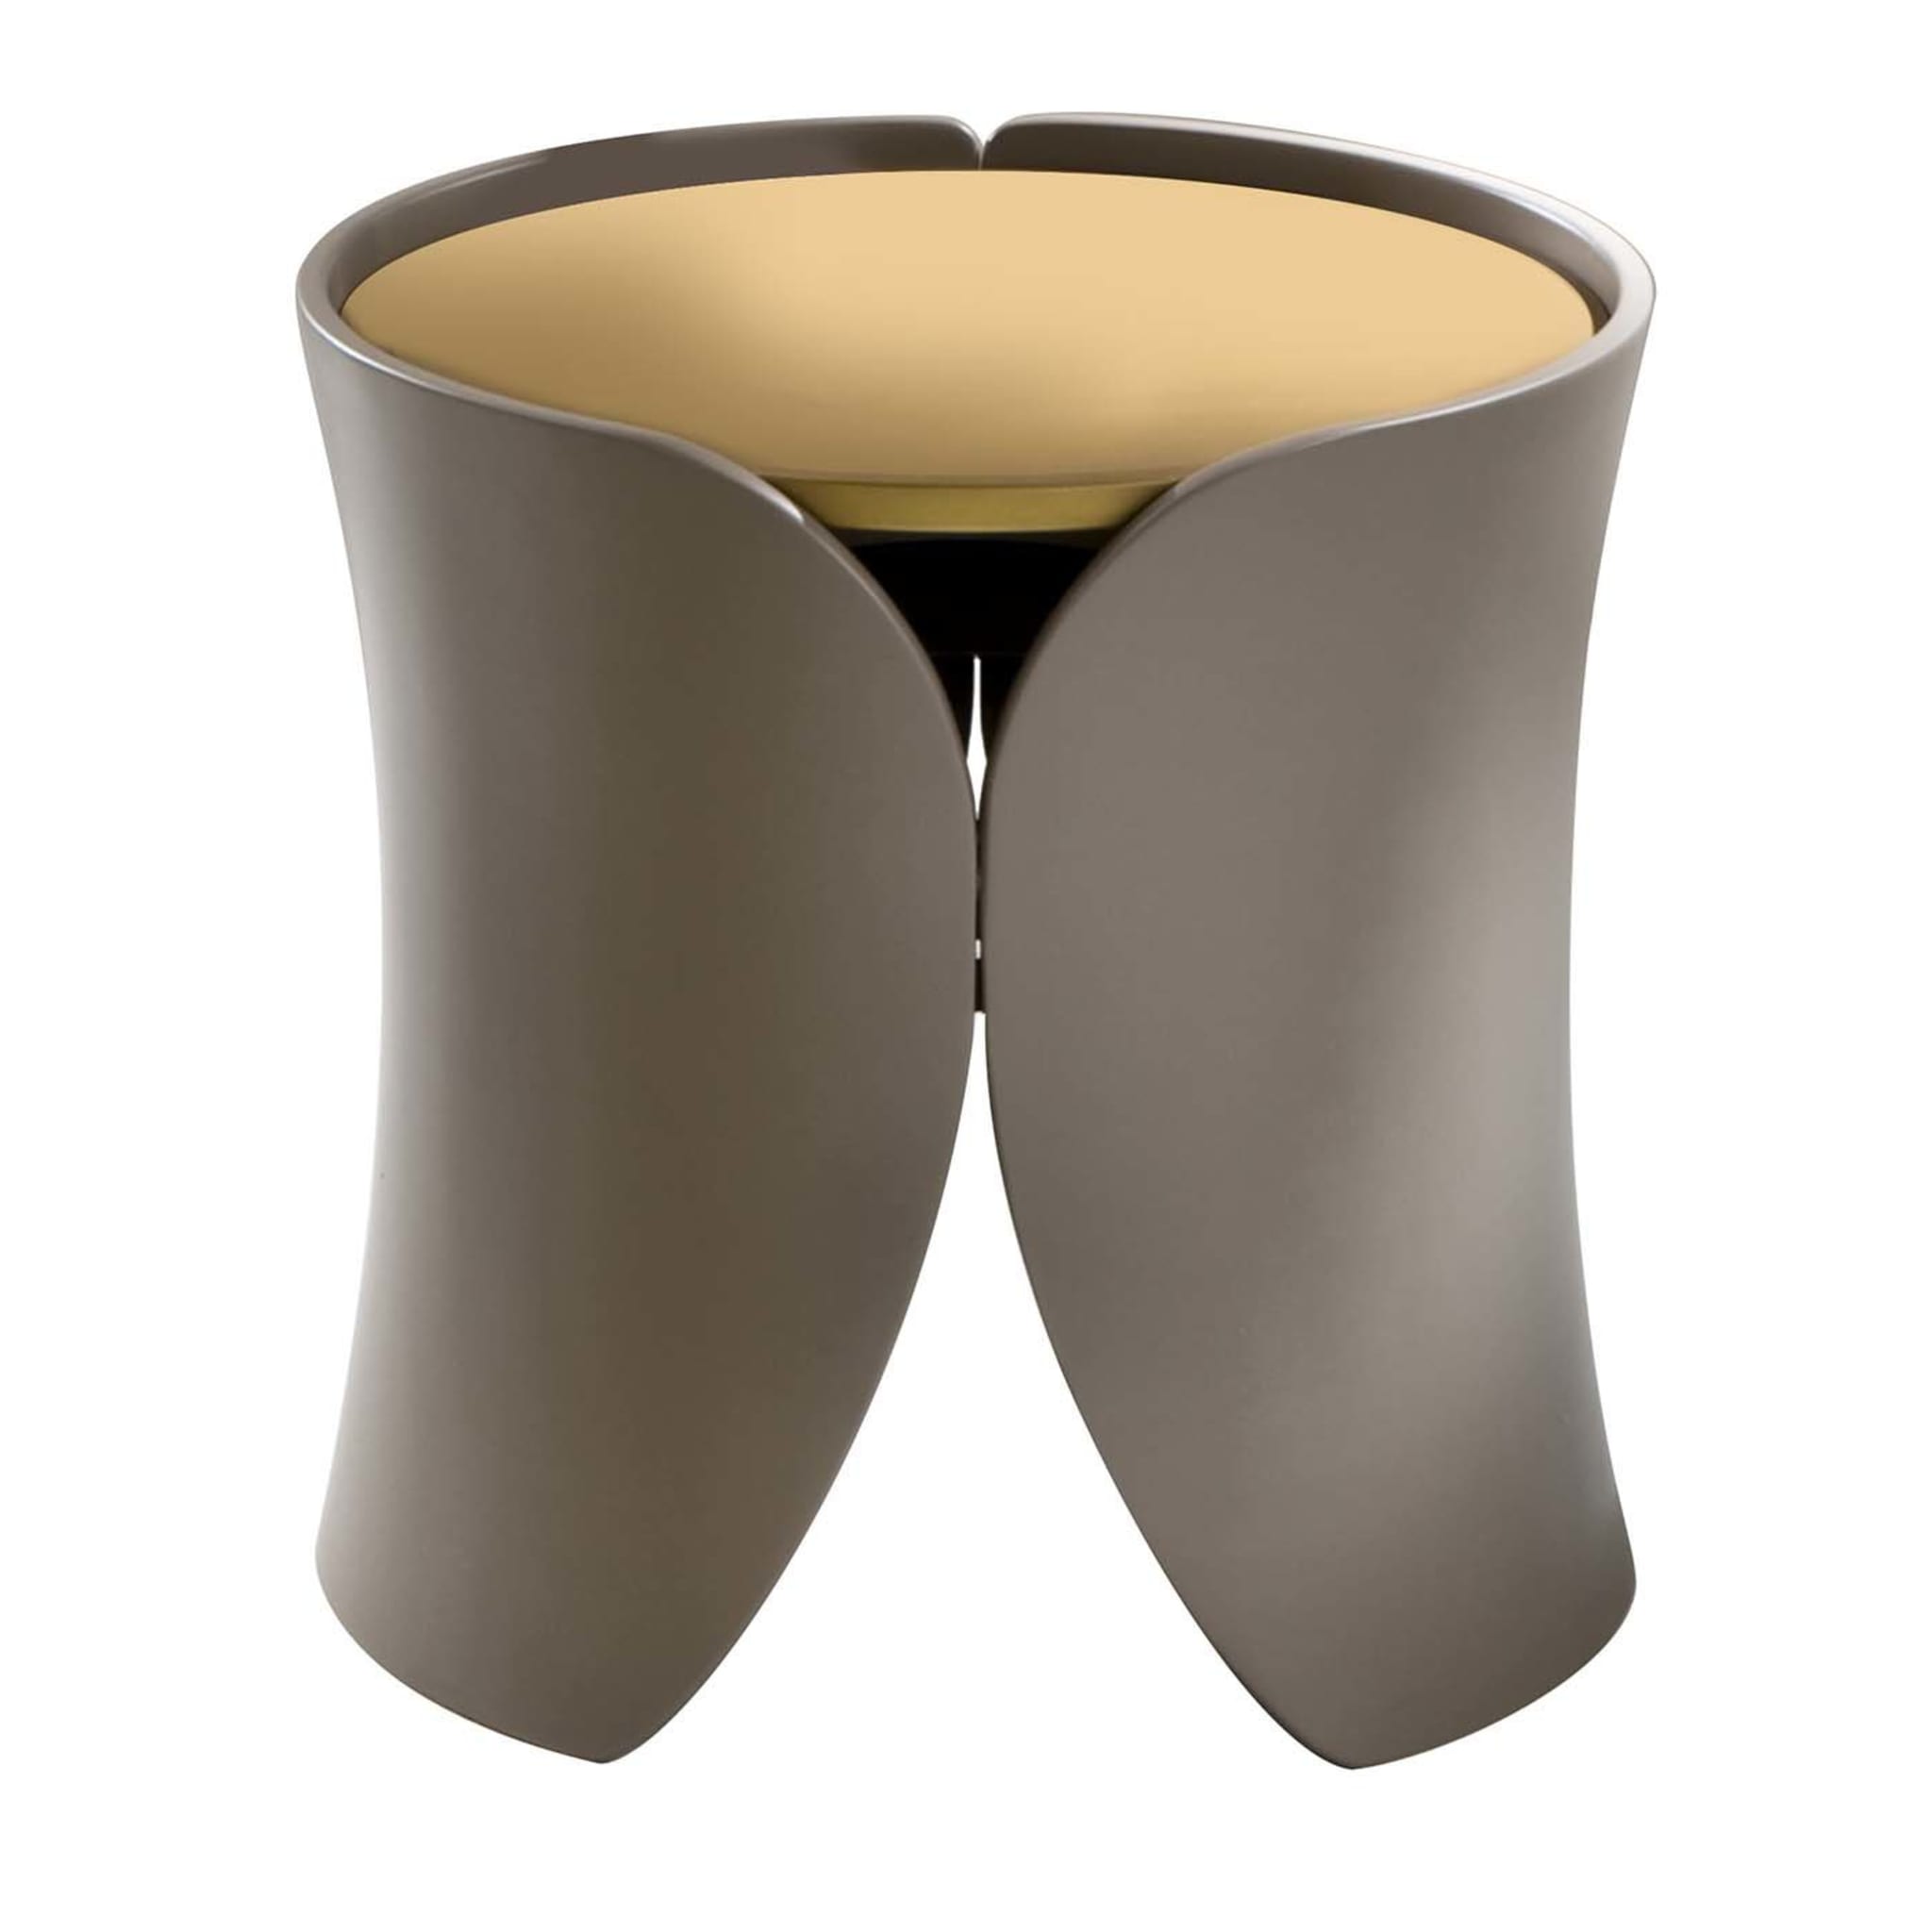 Hug Side Table by Cesare Arosio - Main view